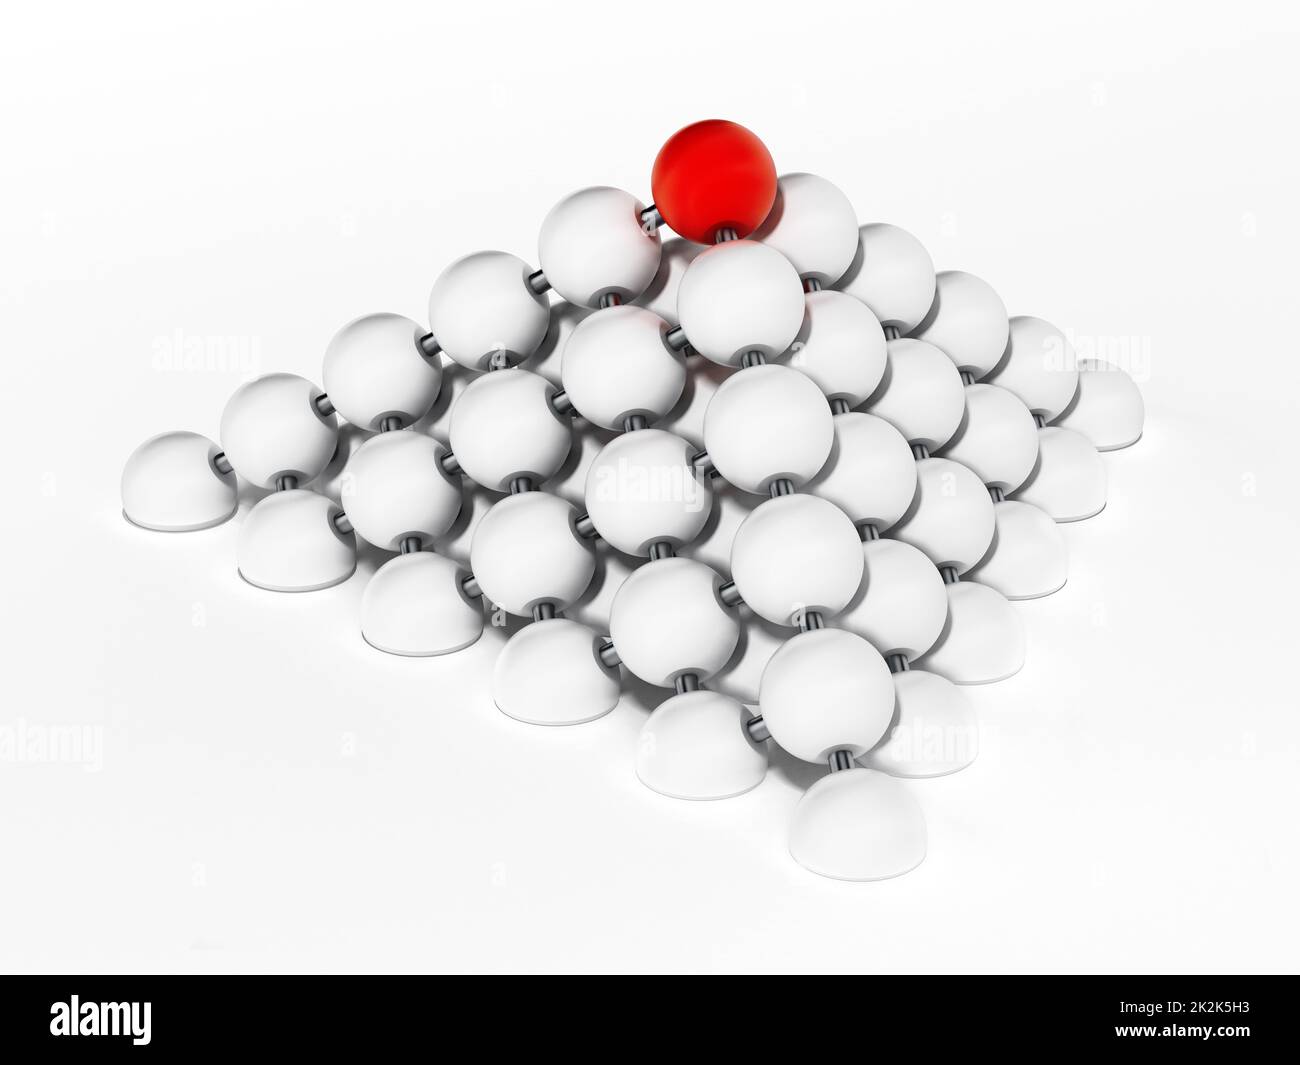 White spheres forming a pyramid shape. 3D illustration Stock Photo